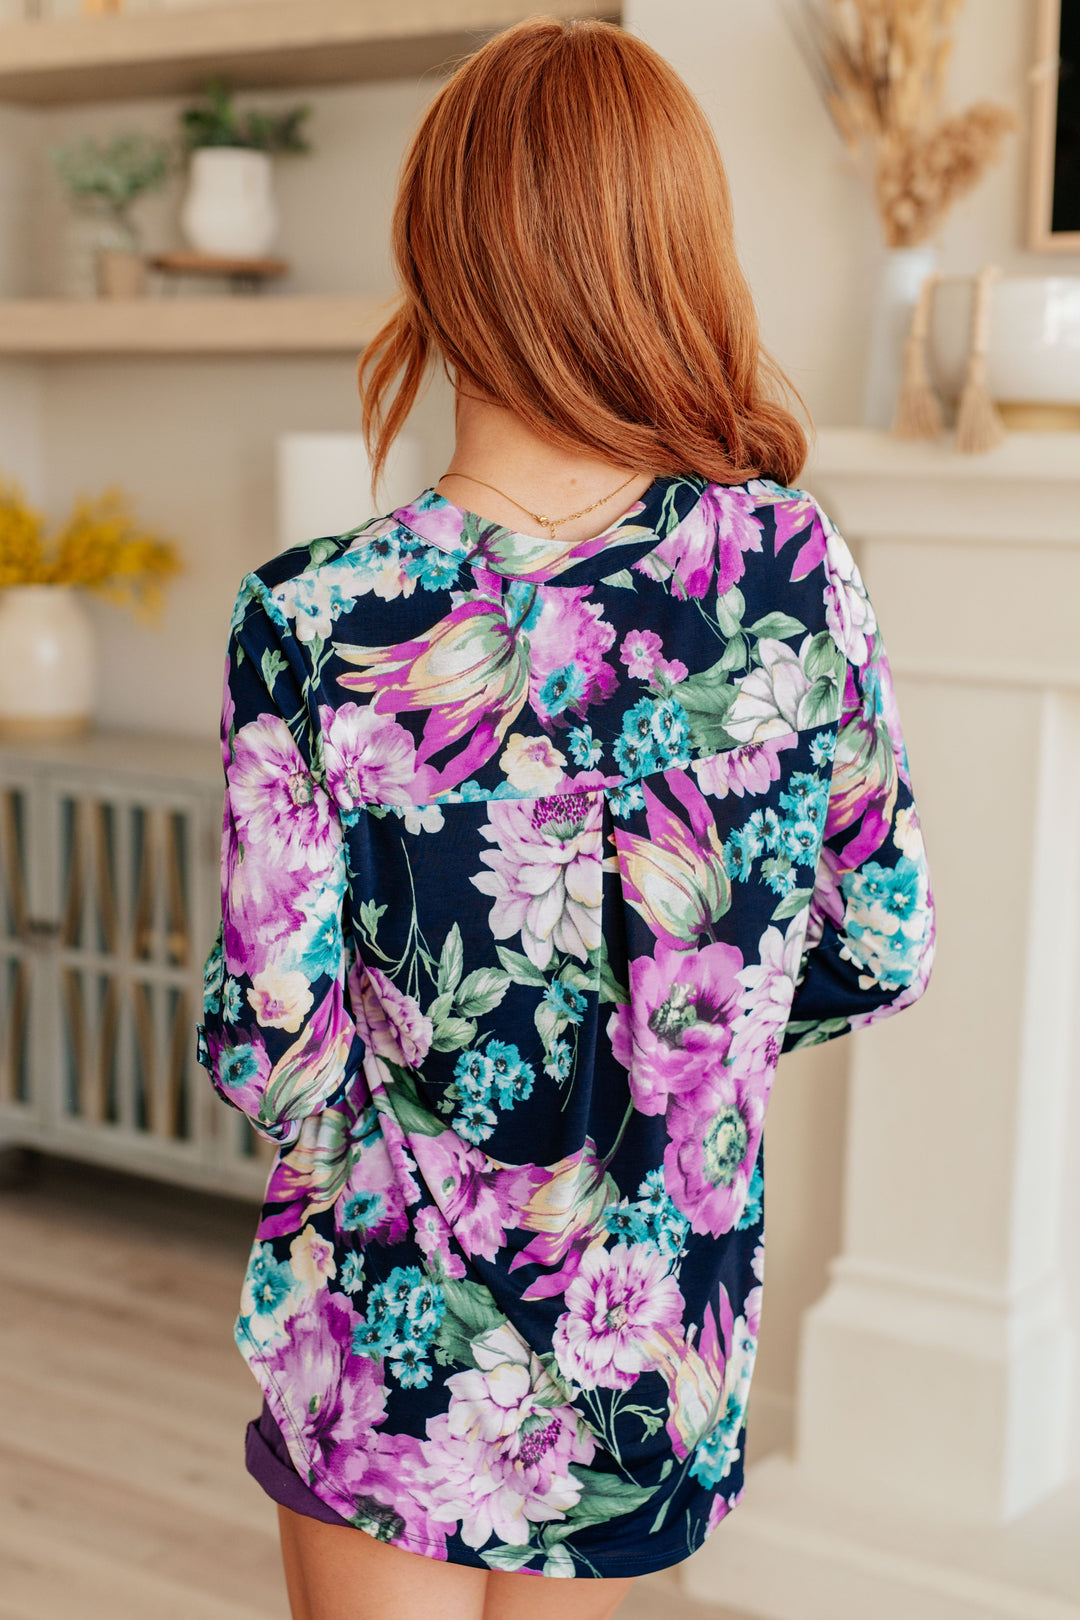 Lizzy Top in Navy and Purple Floral-Short Sleeve Tops-Inspired by Justeen-Women's Clothing Boutique in Chicago, Illinois